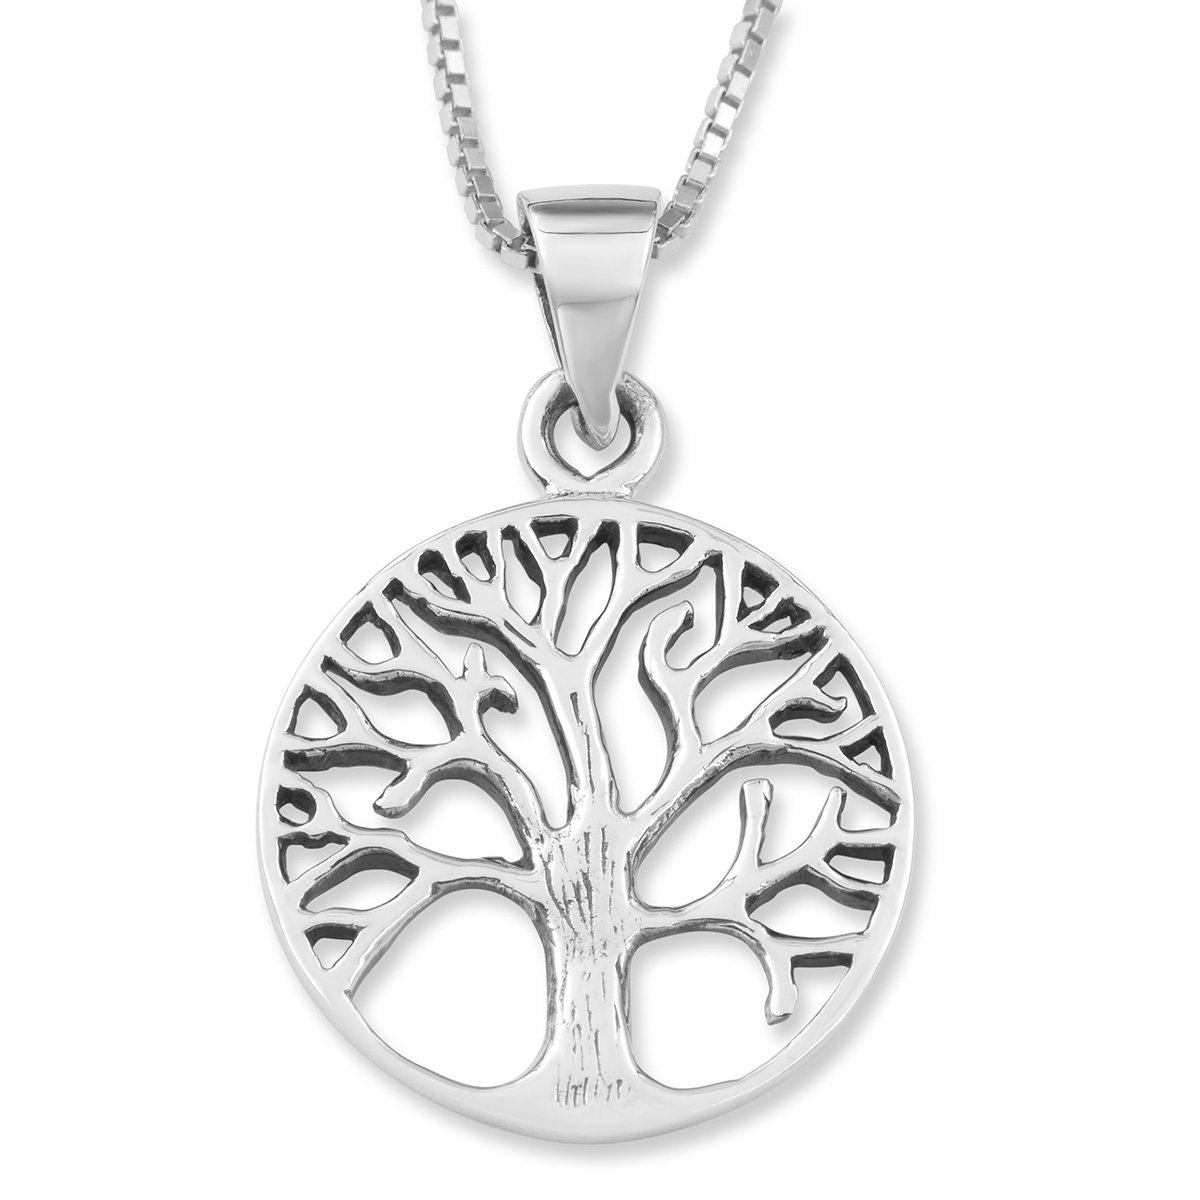 Luminous Sterling Silver Tree Of Life Necklace - Fanduco